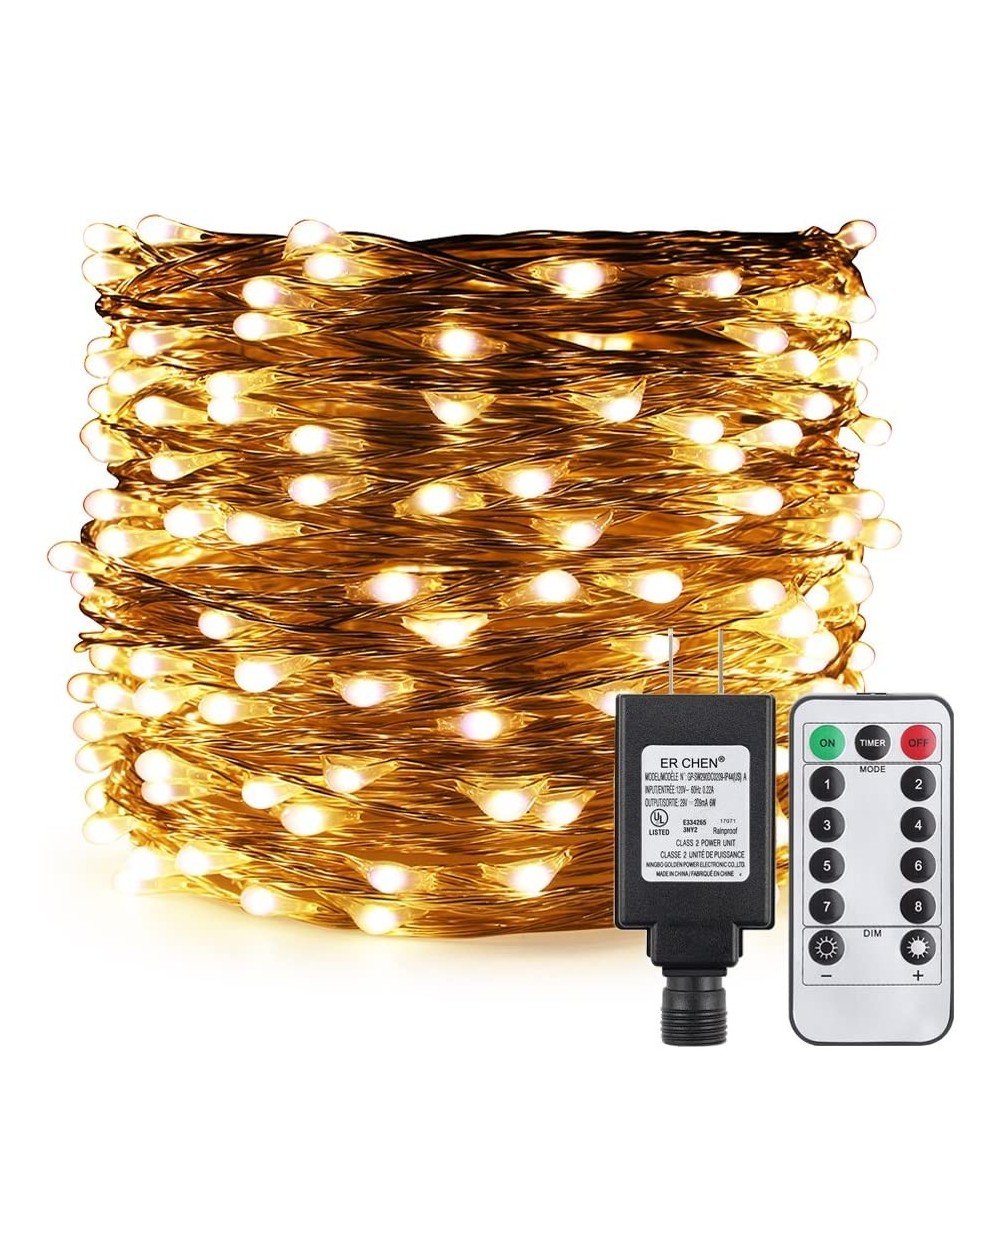 Outdoor String Lights Dimmable LED String Lights Plug in with Remote- 105Ft 300LEDs Silver Coated Copper Wire Fairy Lights 8 ...